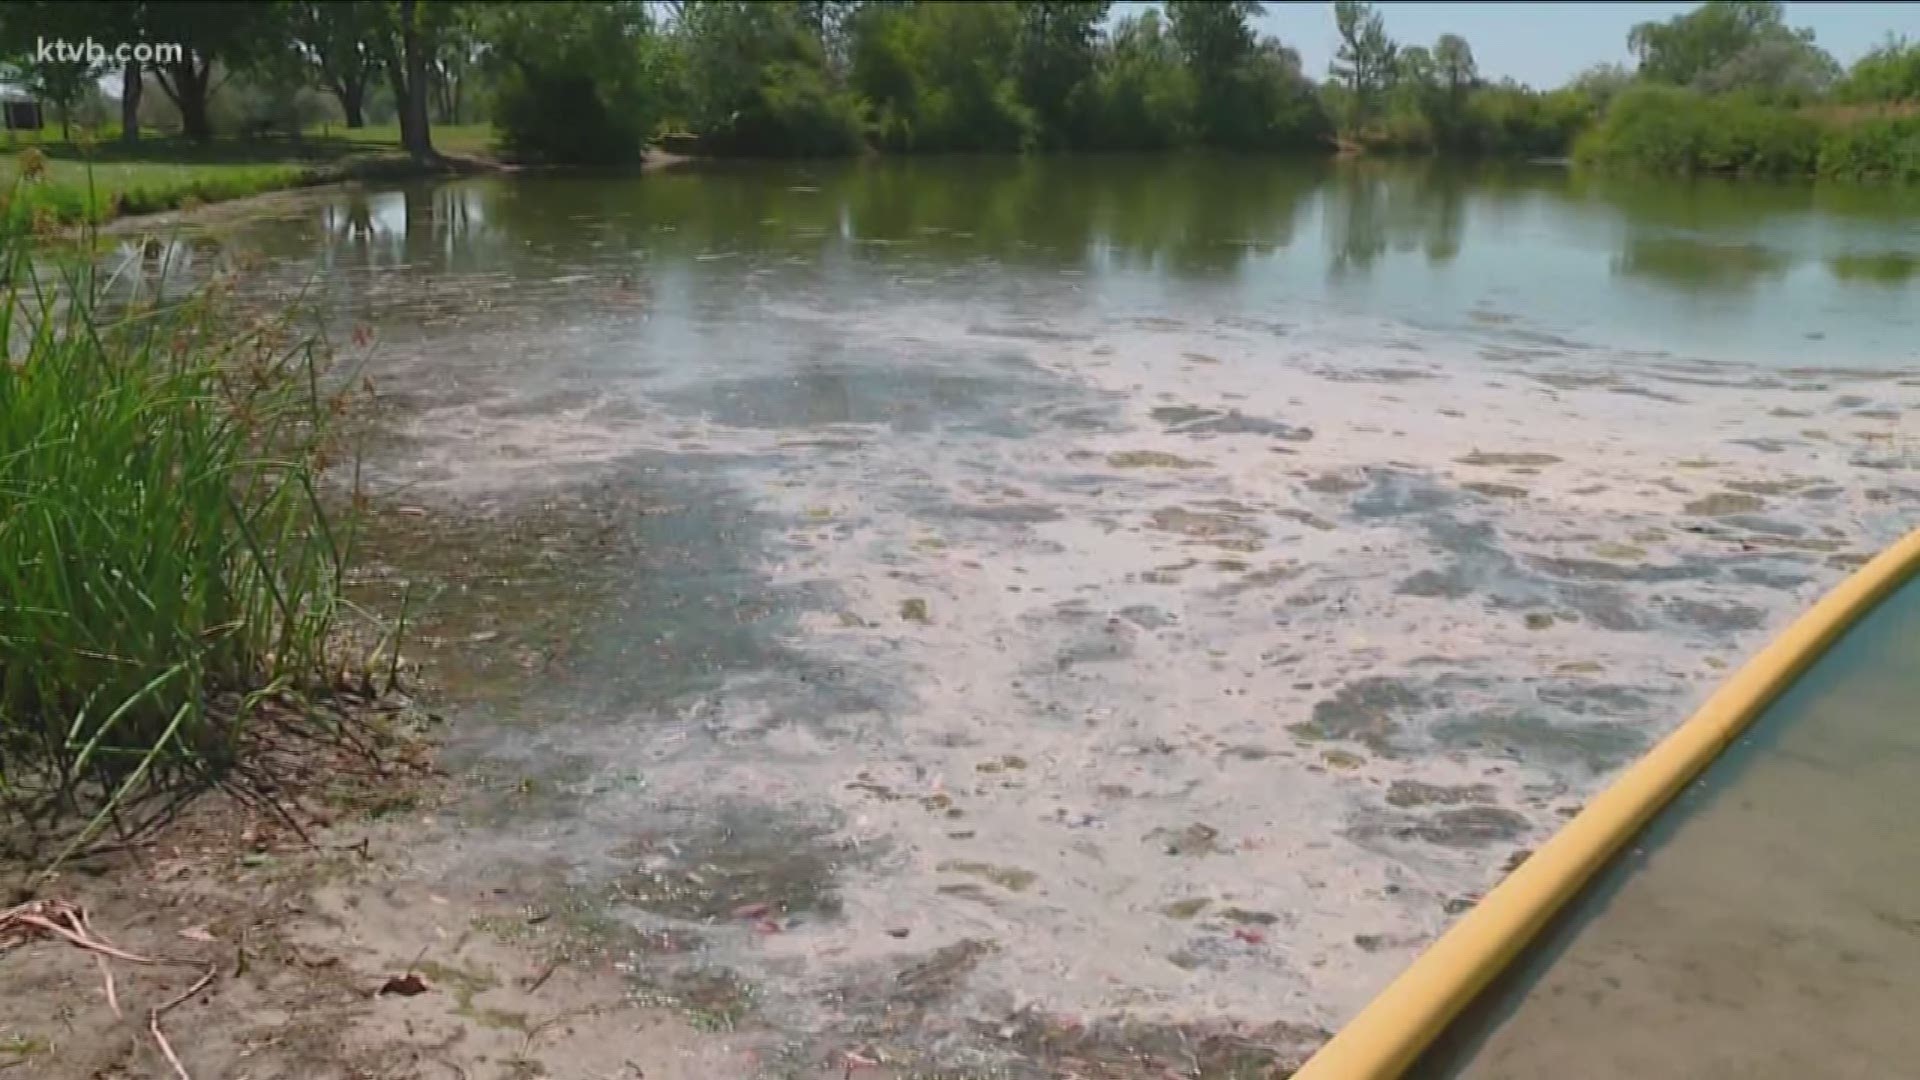 According to the Idaho Department of Environmental Quality, seven local reservoirs have tested positive for some form of cyanobacteria toxin this summer.